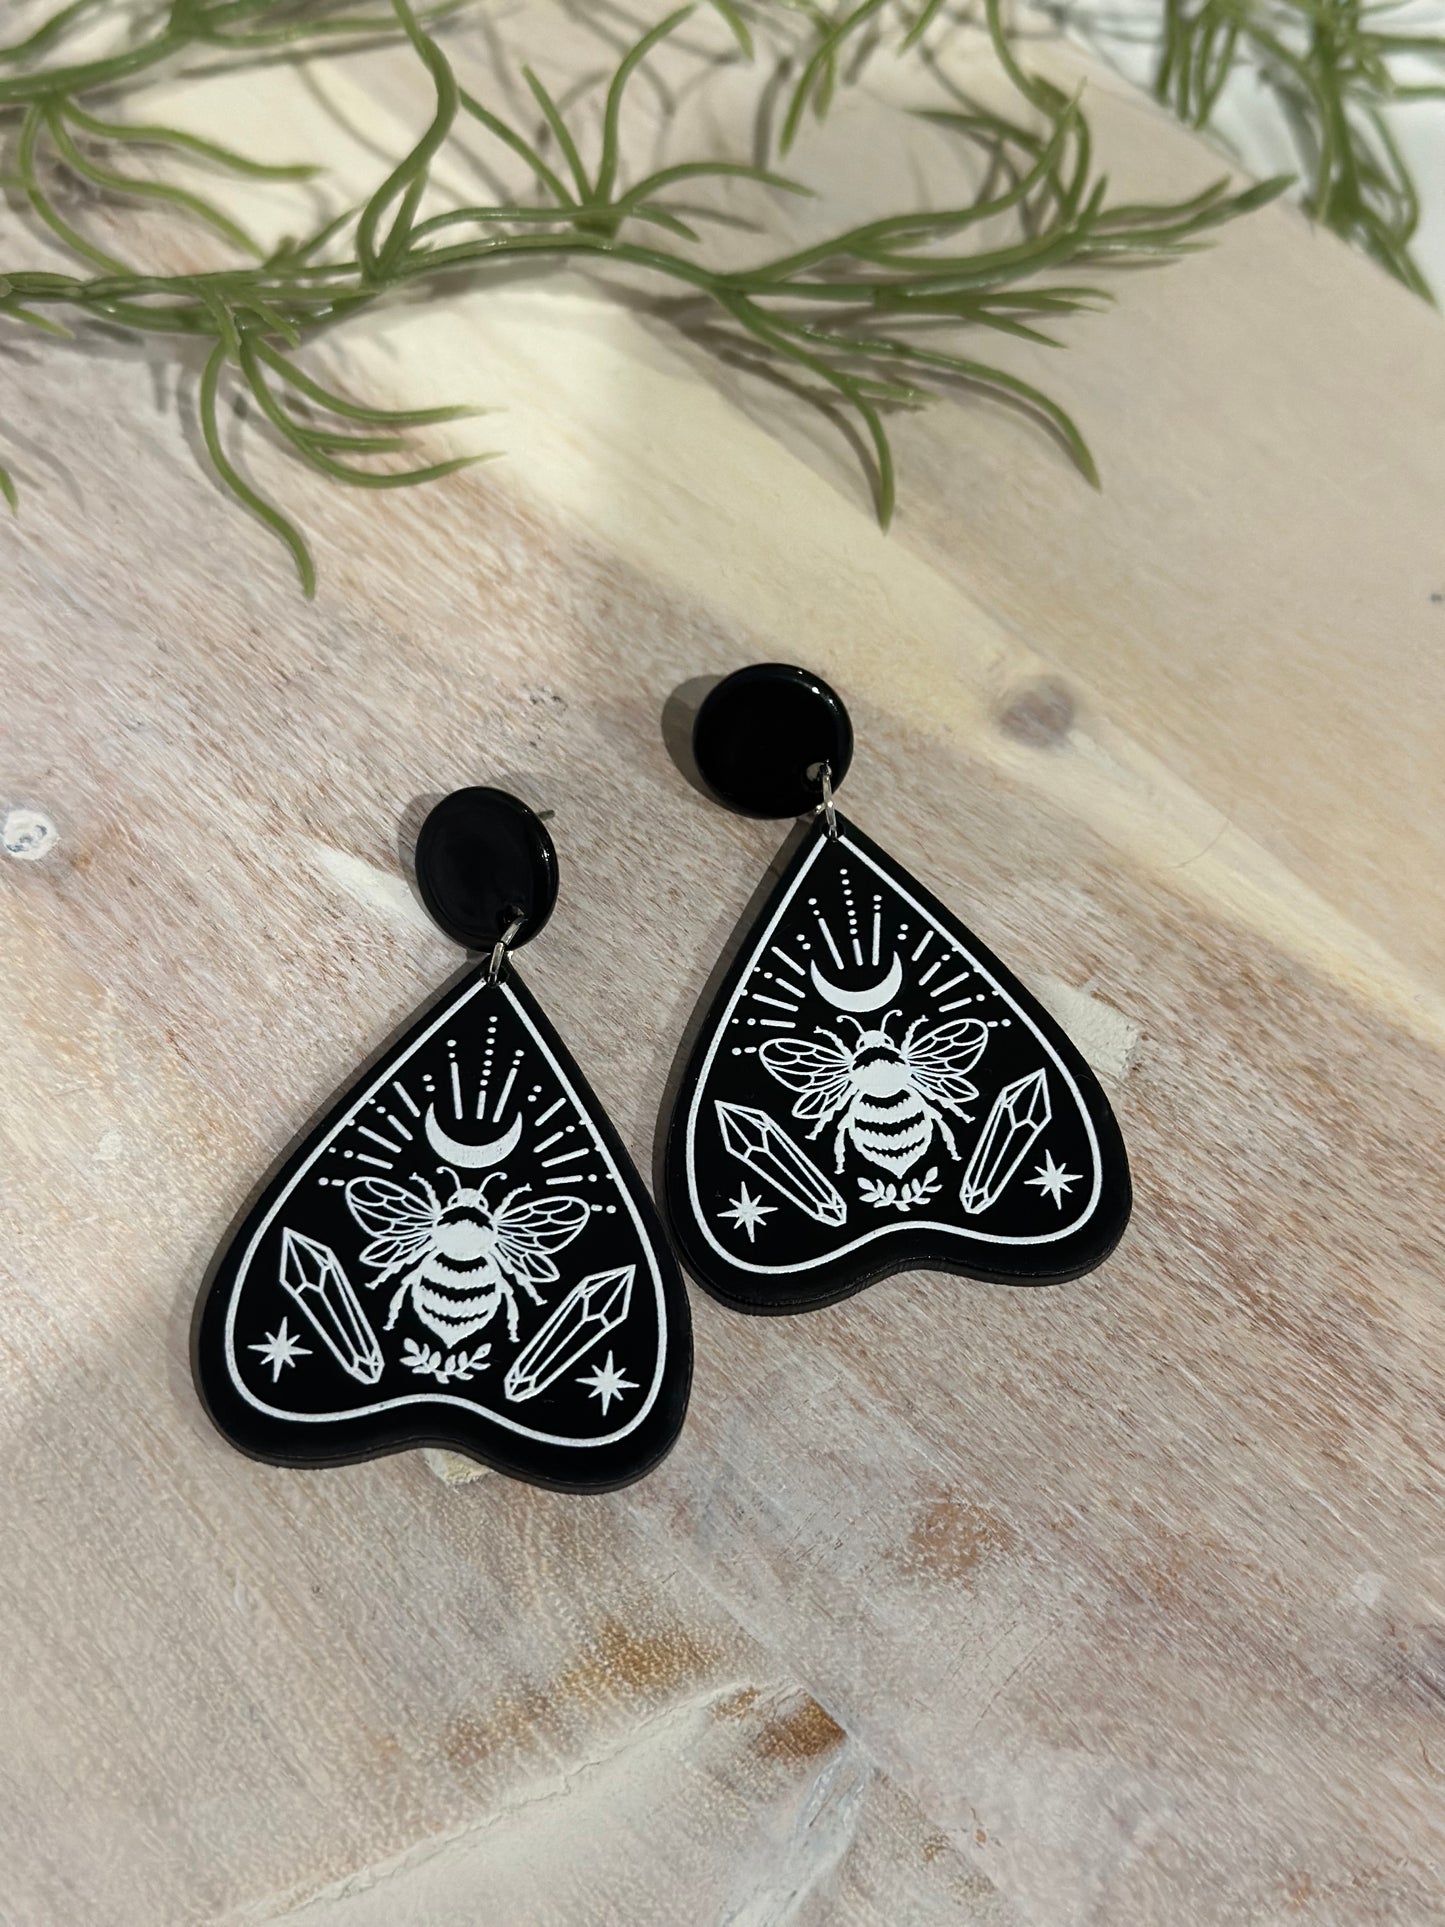 Acrylic Earrings-Bees and crystals